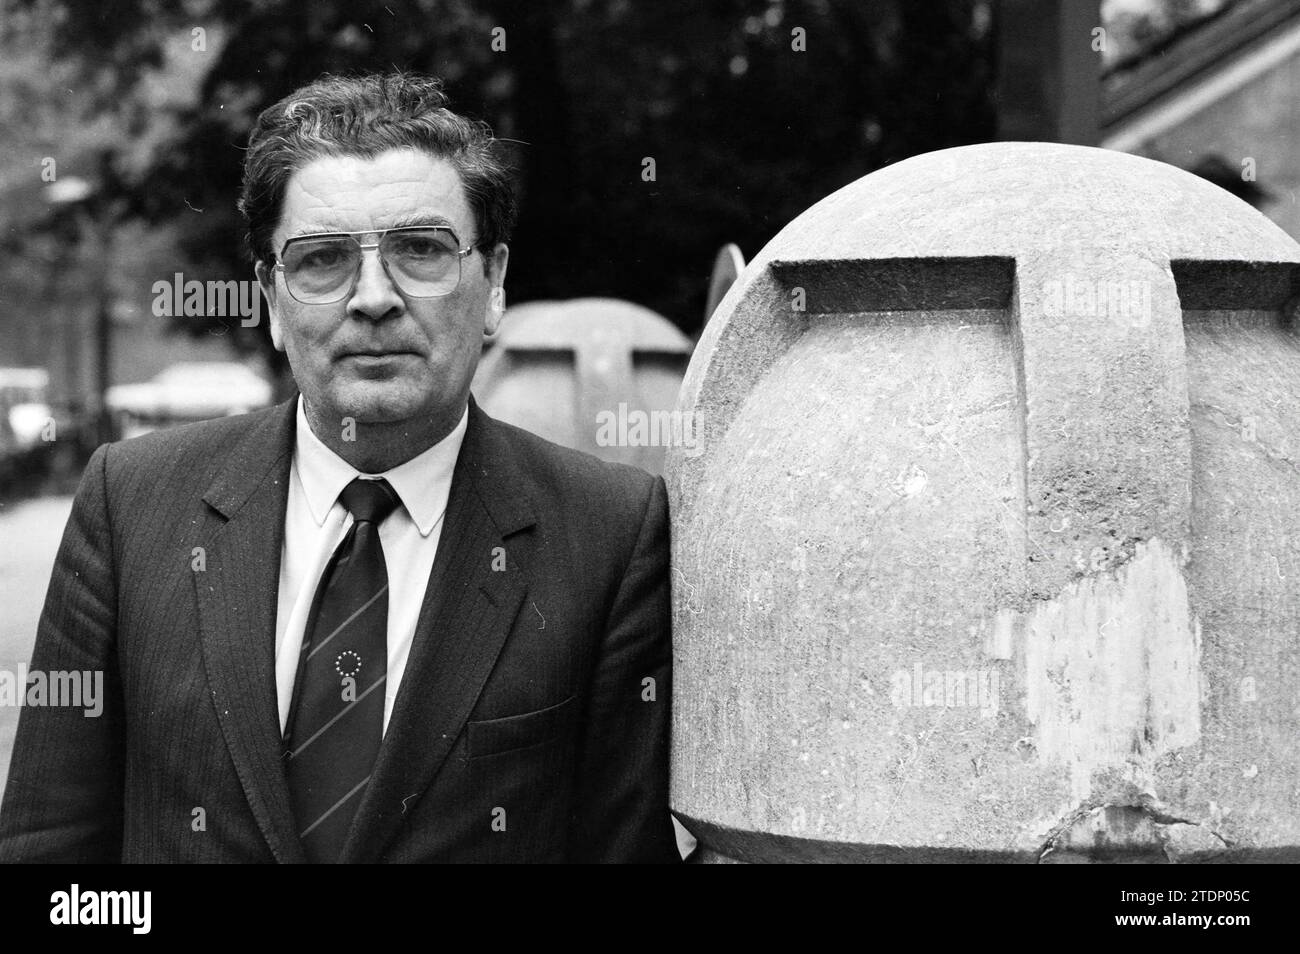 John Hume, Trade Union Museum, Amsterdam, Amsterdam, The Netherlands, 25-05-1994, Whizgle News from the Past, Tailored for the Future. Explore historical narratives, Dutch The Netherlands agency image with a modern perspective, bridging the gap between yesterday's events and tomorrow's insights. A timeless journey shaping the stories that shape our future Stock Photo